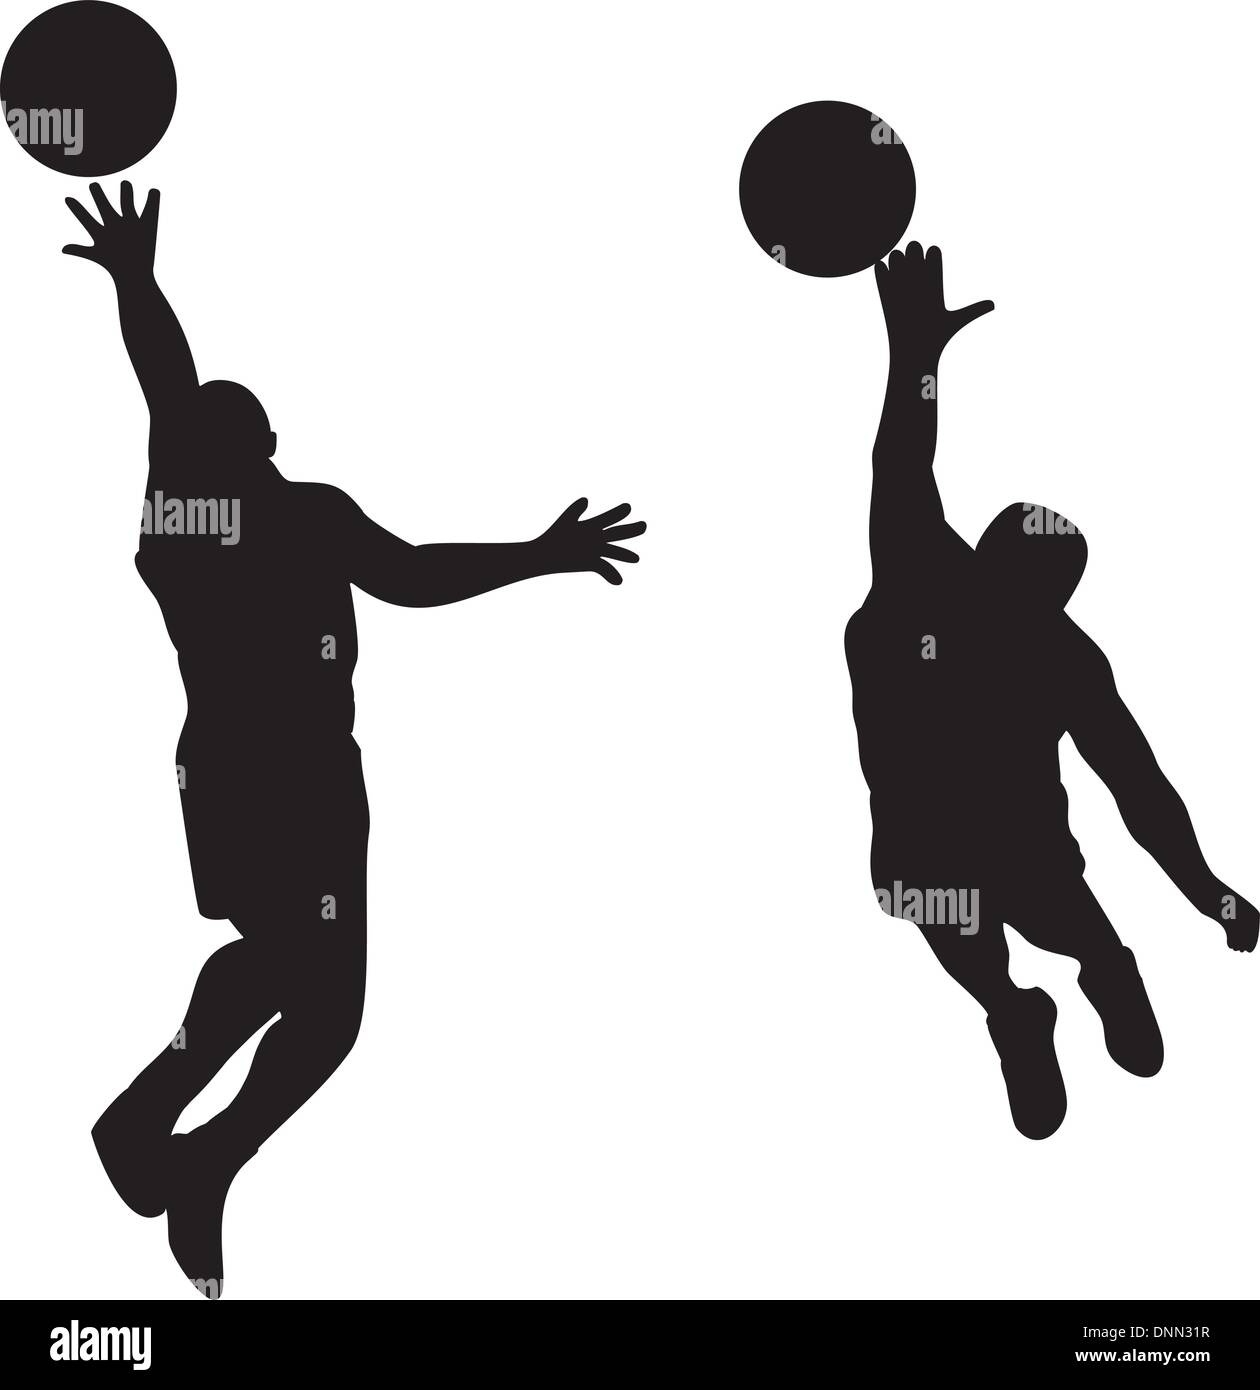 illustration of a basketball player done in retro style. Stock Vector